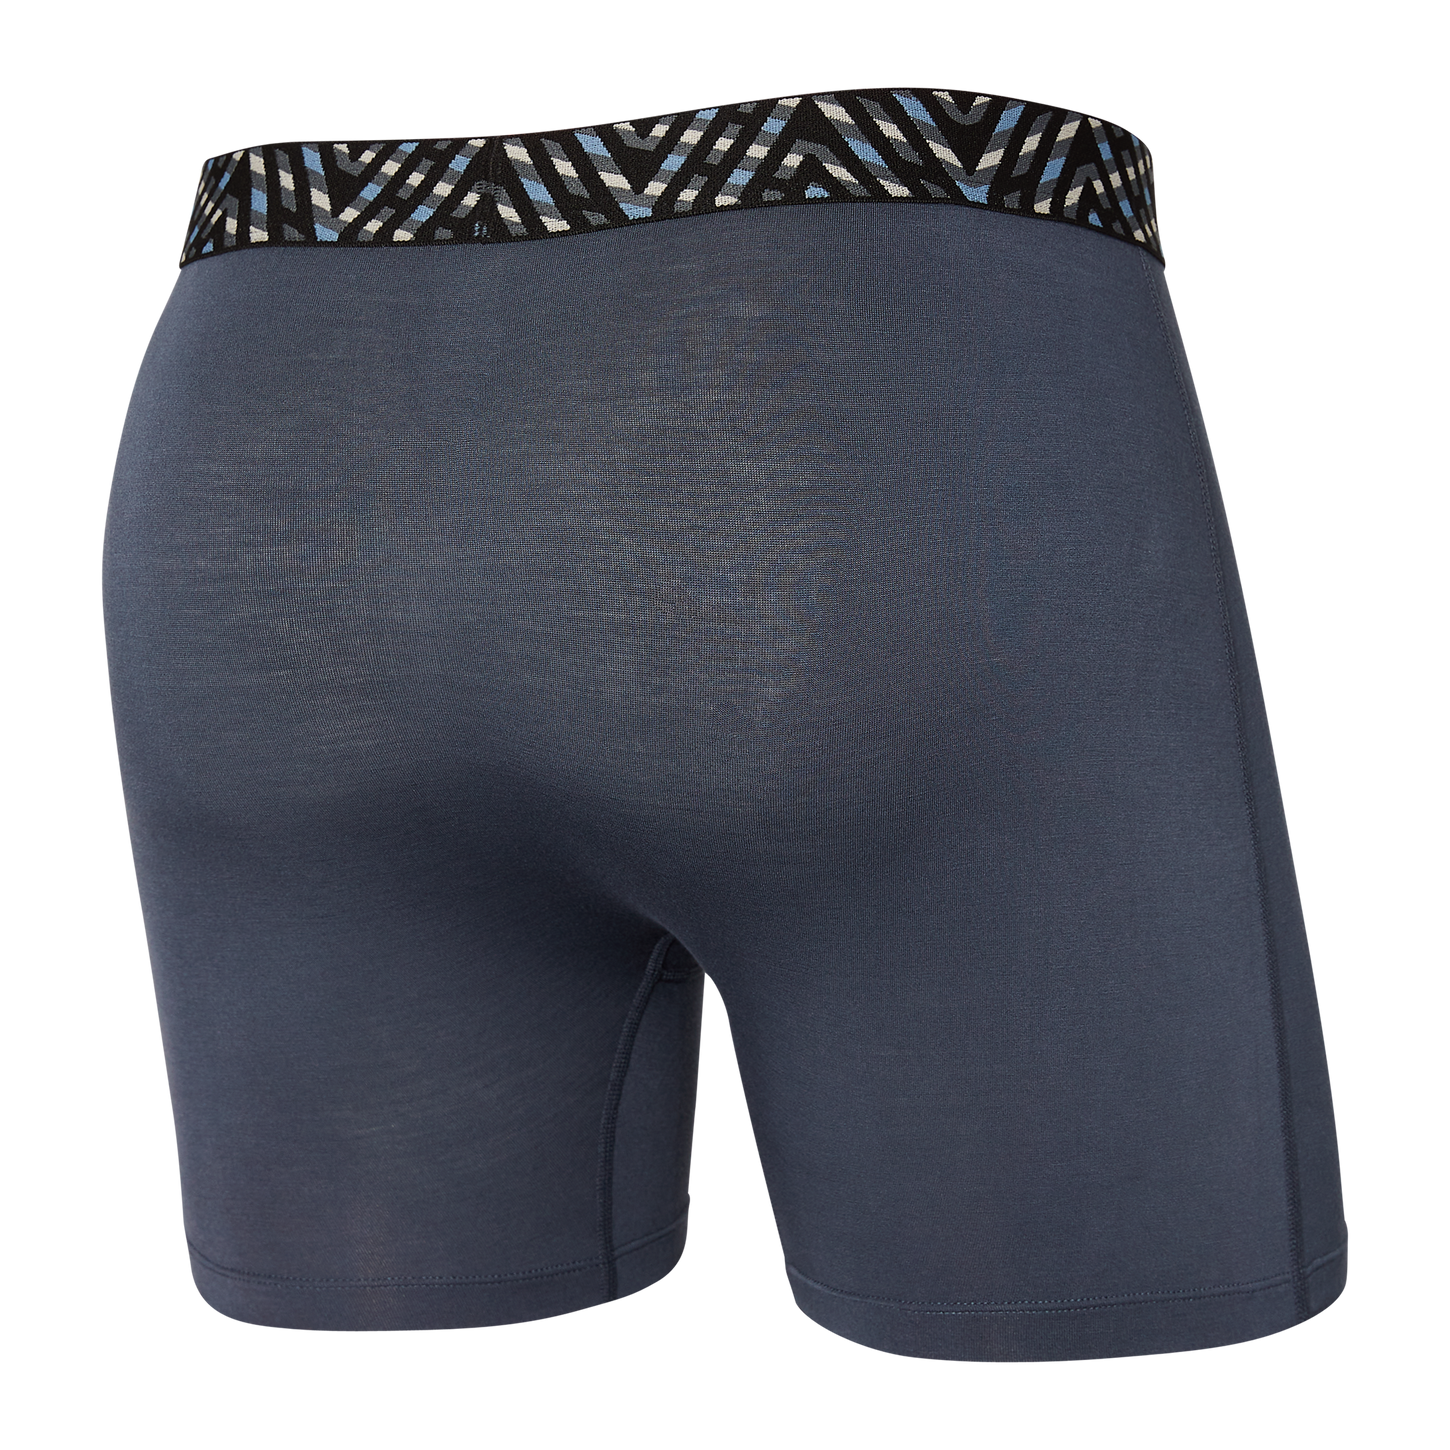 Men's SAXX Vibe Boxer Brief Pattern: India Ink Amaze-Zing WB